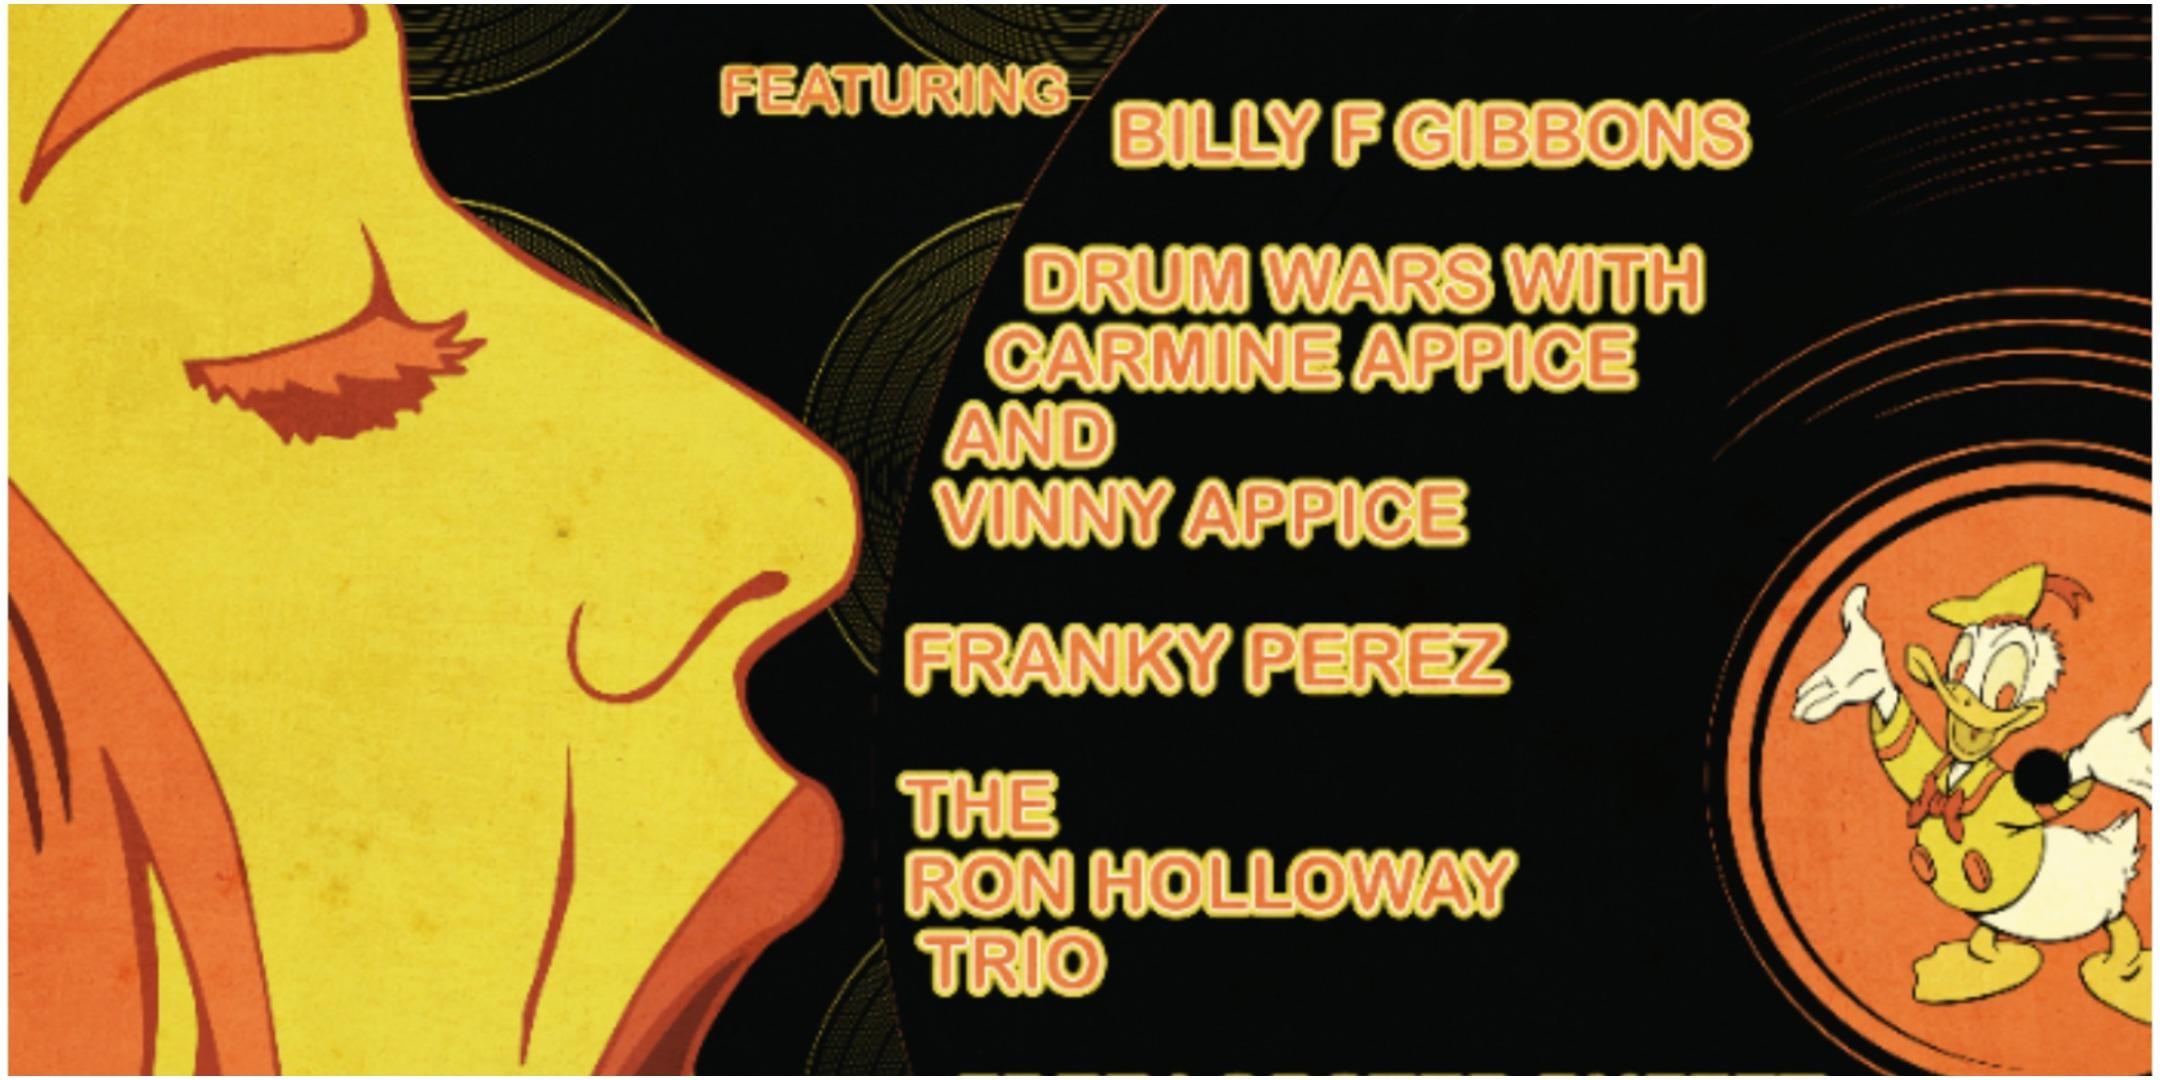 Billy F.Gibbons,Carmine & Vinny Appice,Franky Perez,Ron Holloway and more!